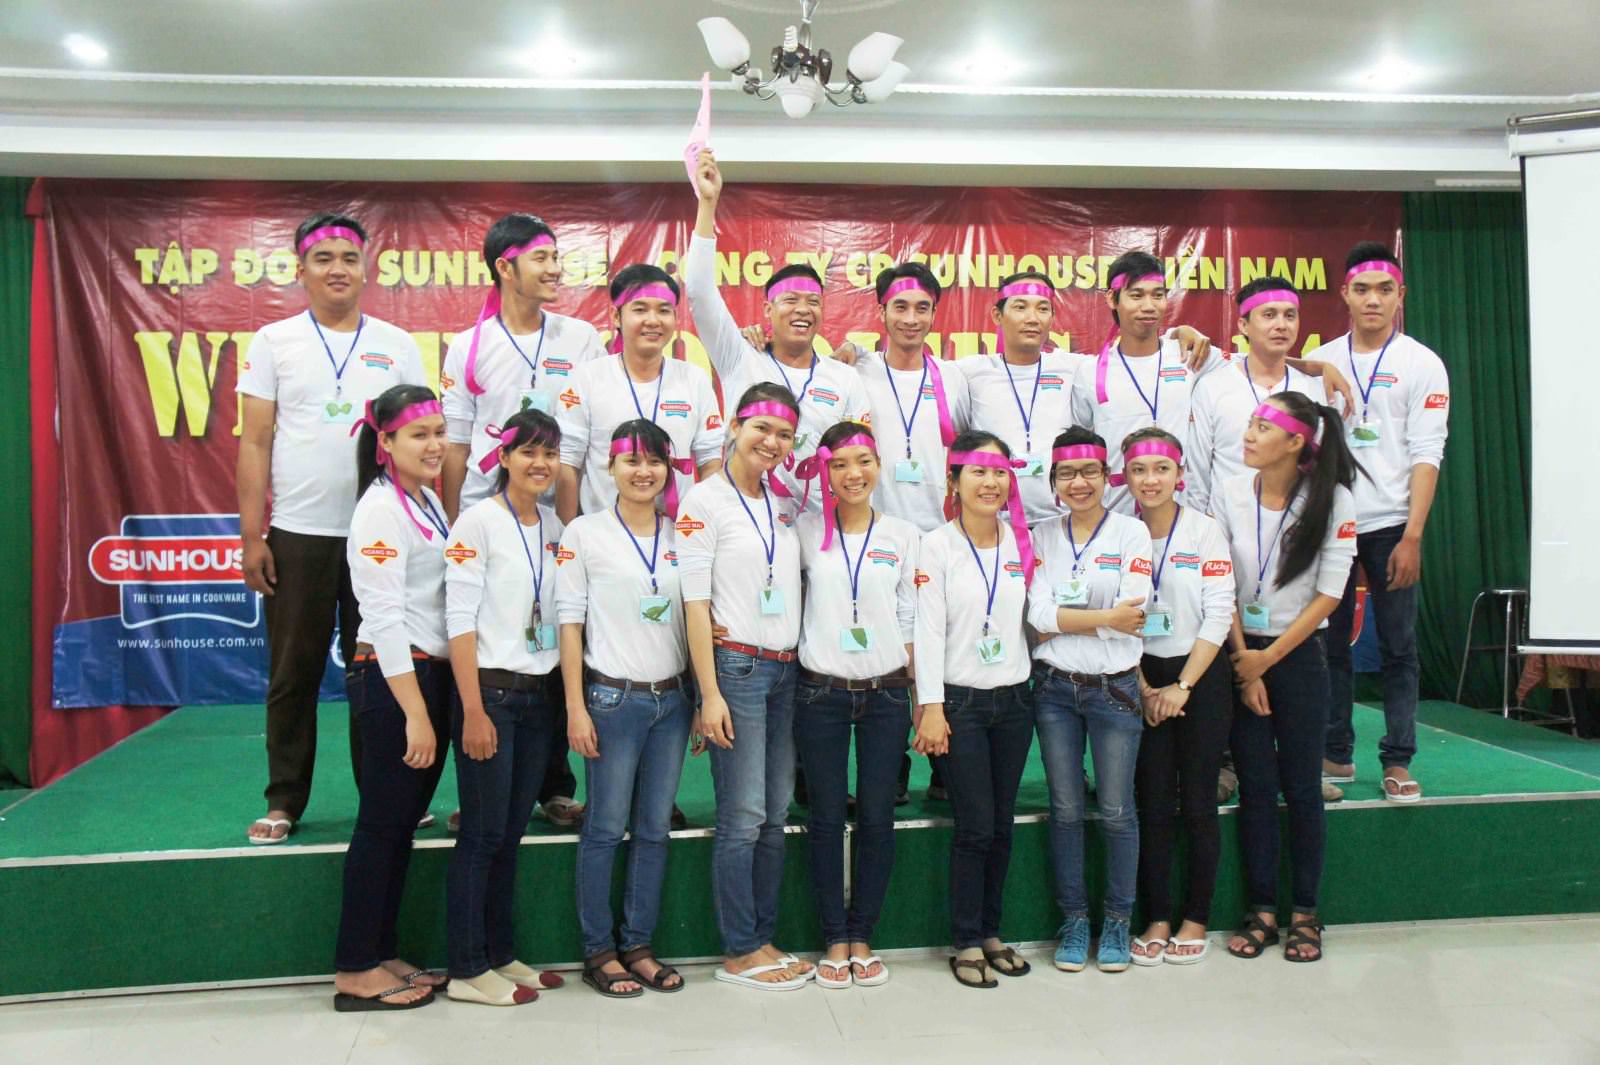 NHẬT KÝ WE ARE SODIERS 2014 4